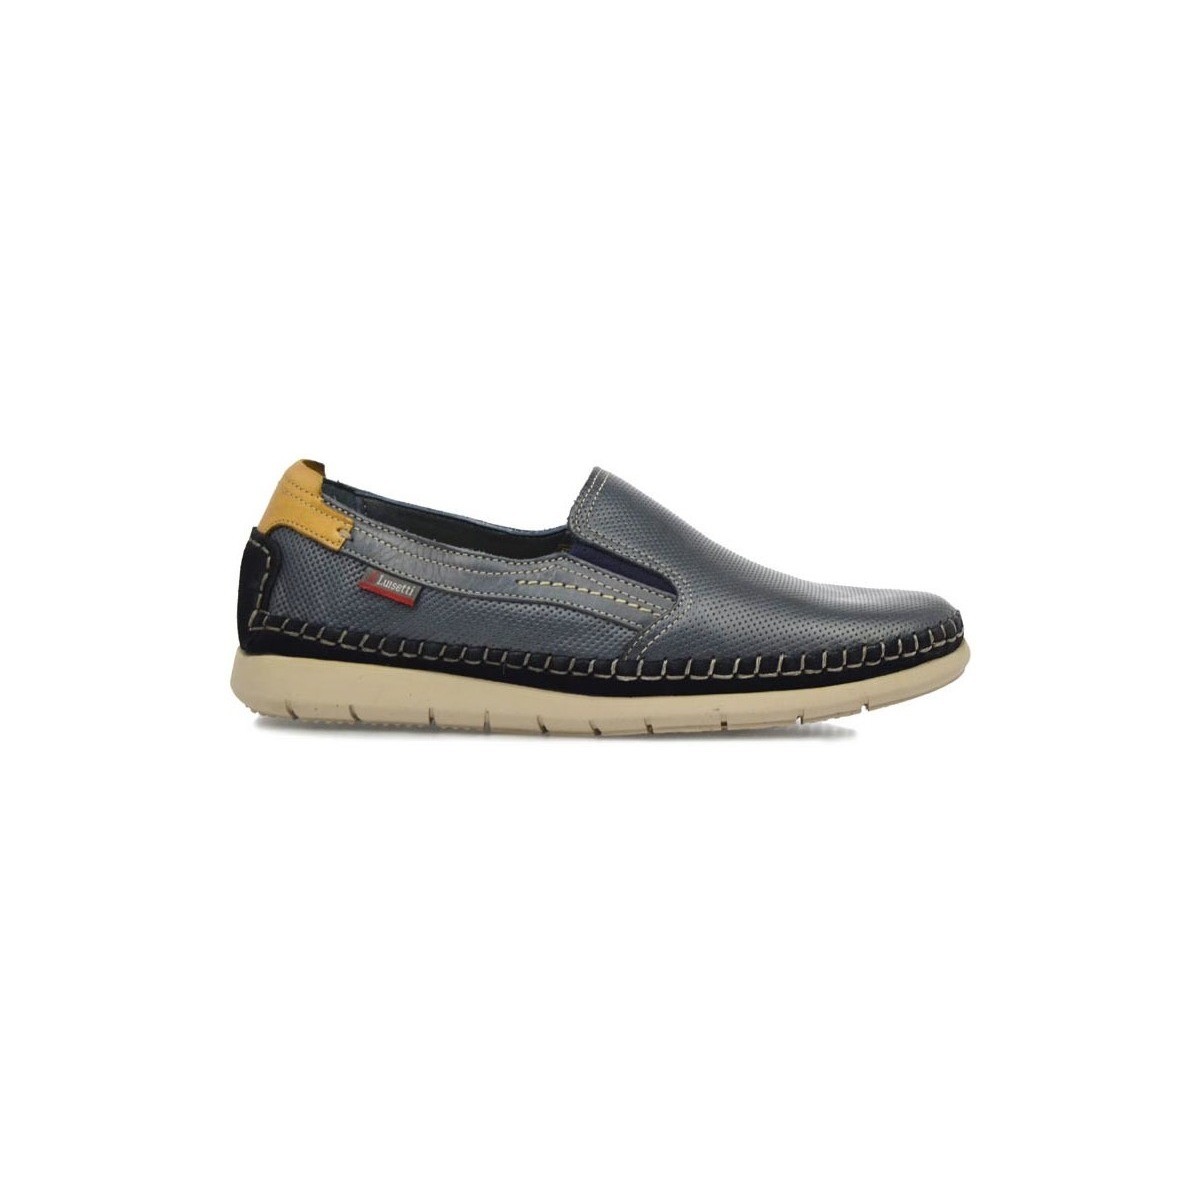 Chaussures Homme Slip ons Luisetti  Bleu